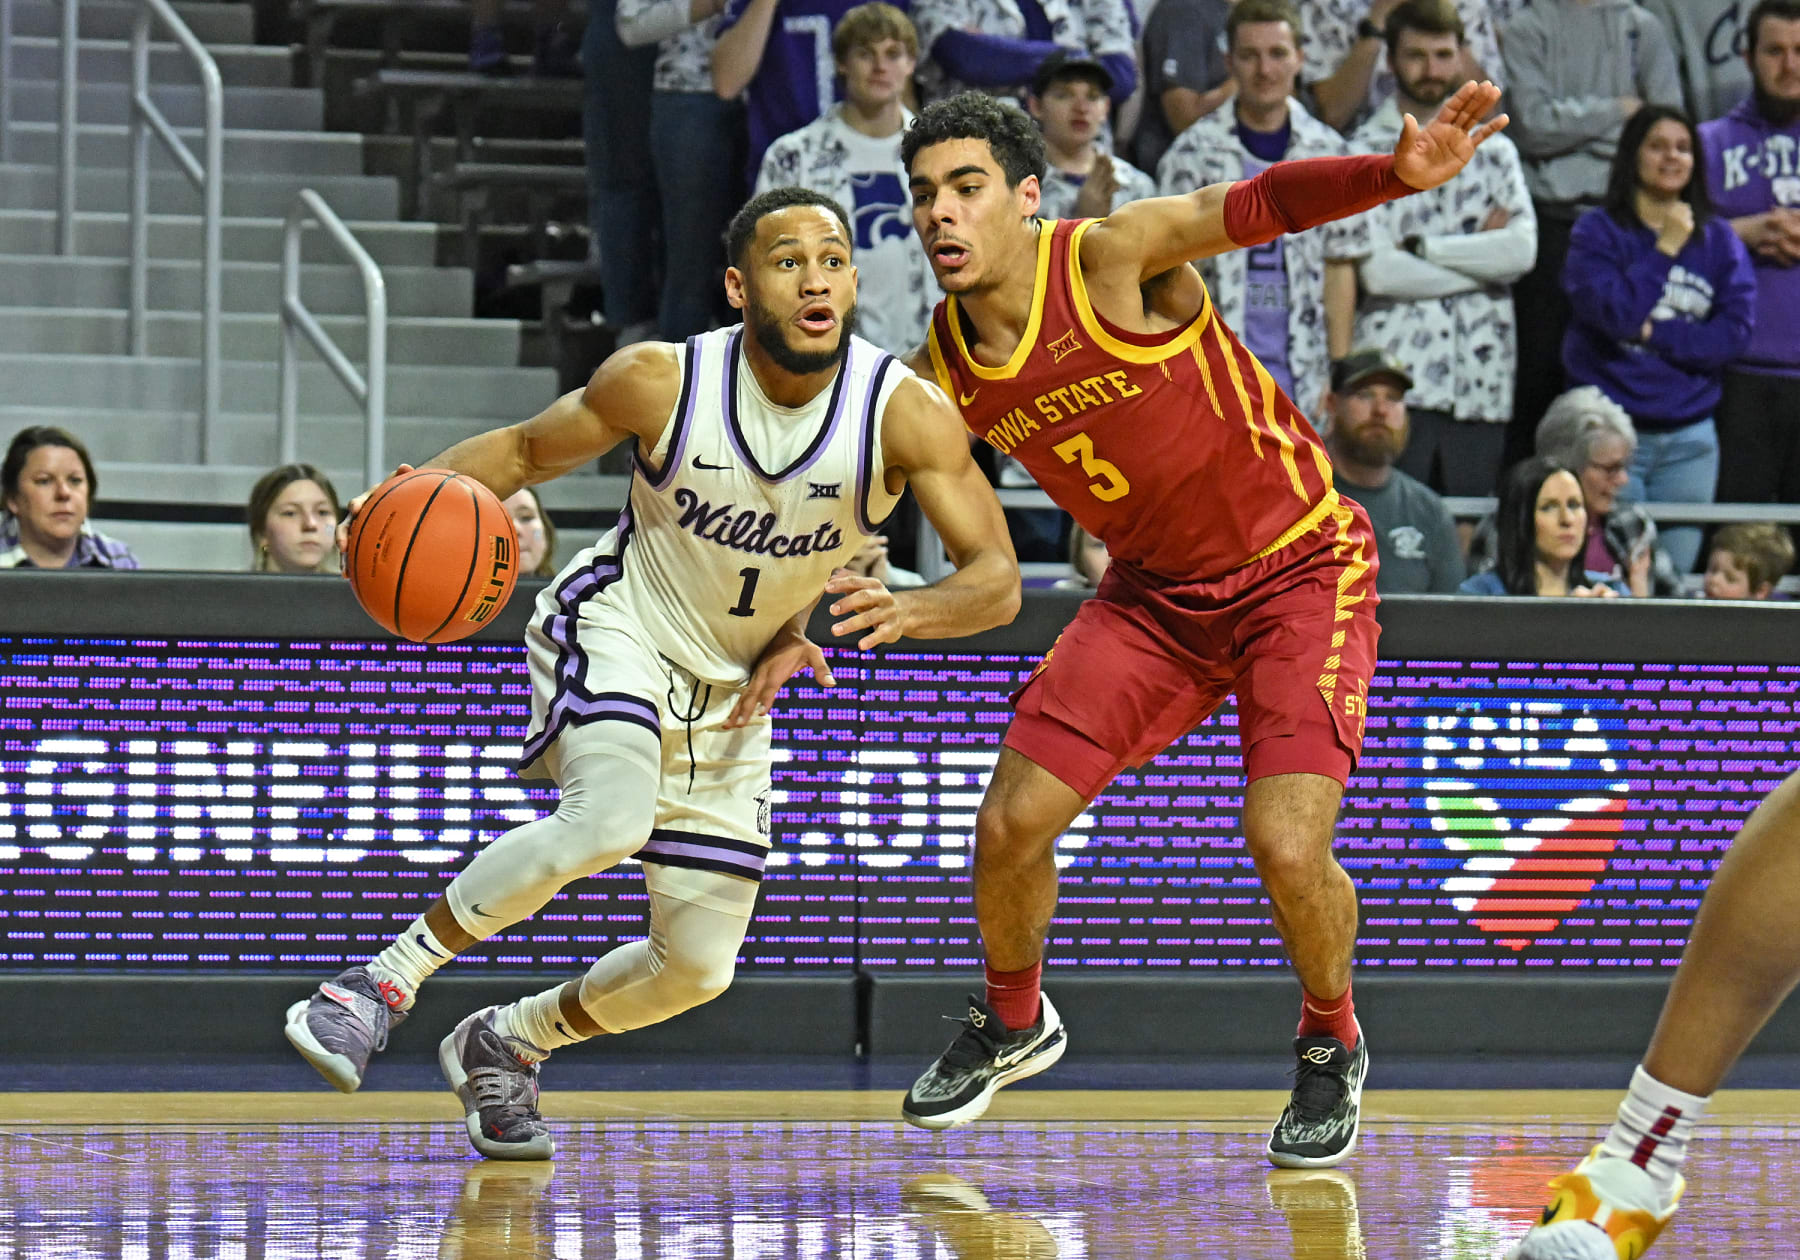 K-State's Markquis Nowell Is Putting Up Steph Curry Numbers